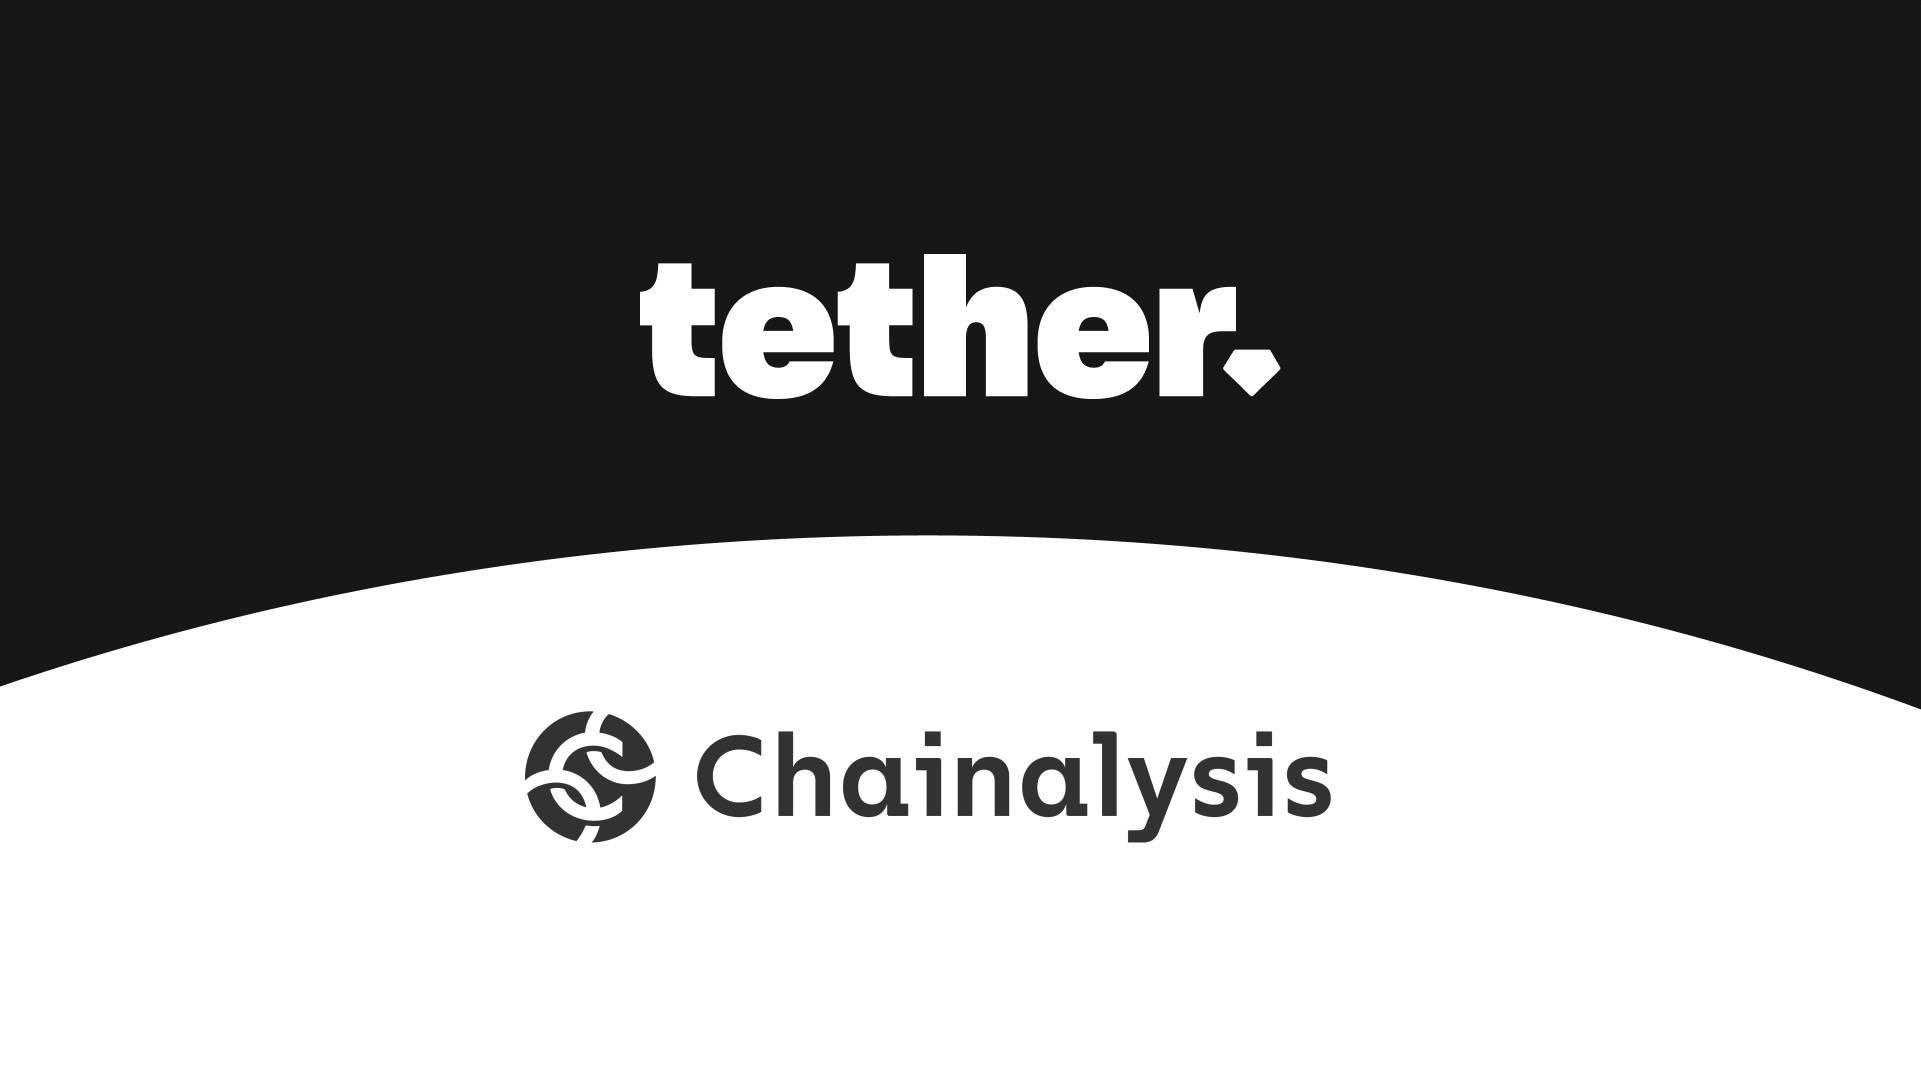 Tether cooperates with Chainalysis to build a monitoring system that helps identify wallet addresses with potential risks of illegal USDT trading activities.